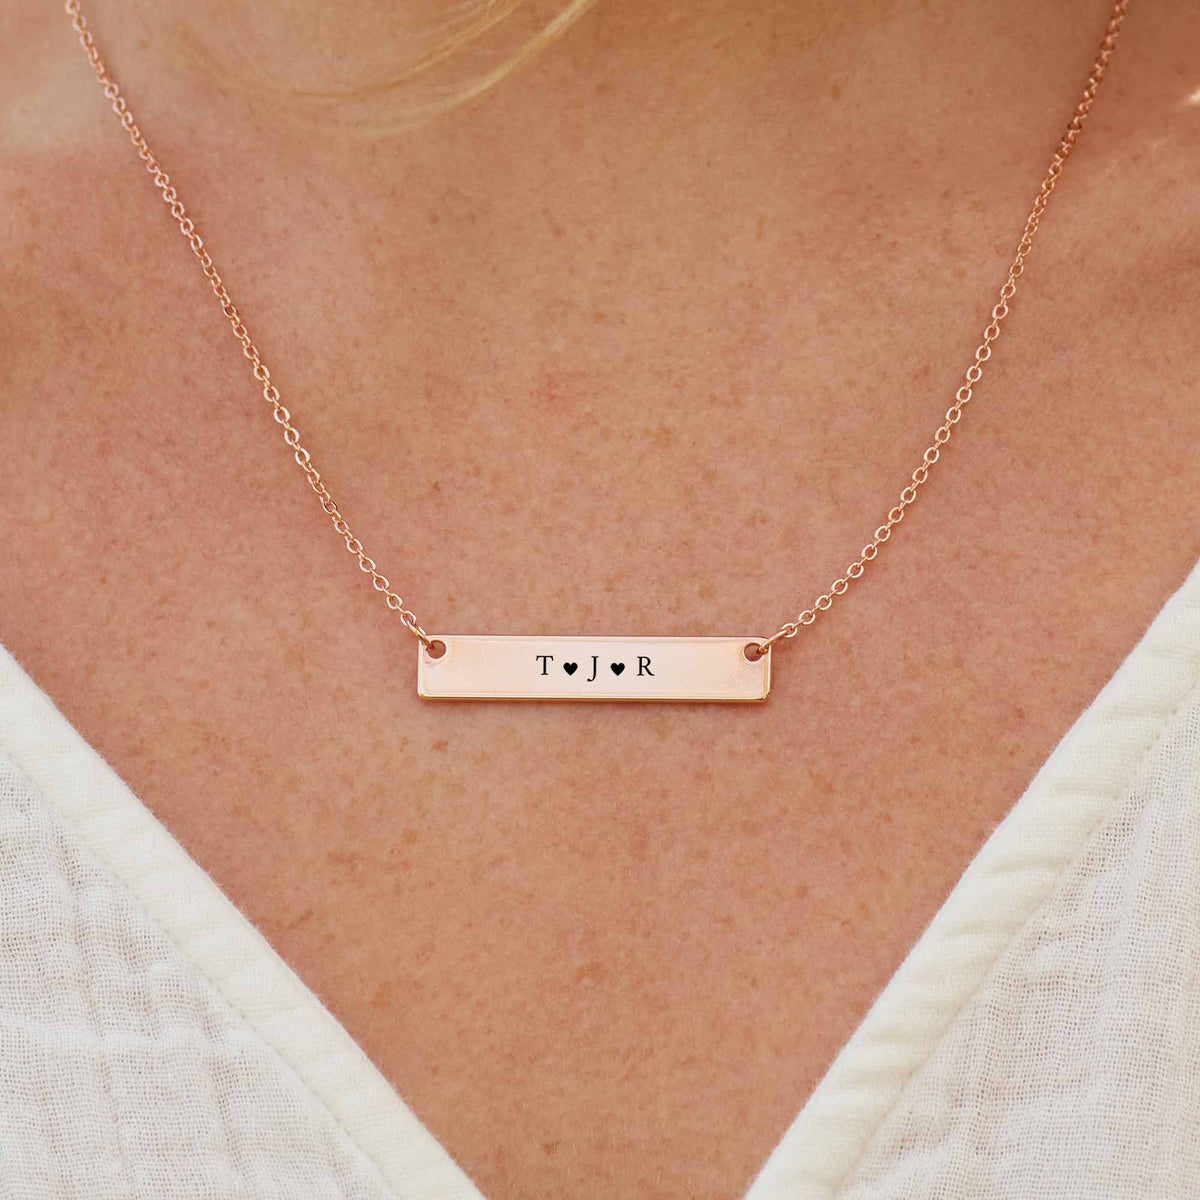 Type Your Message | Horizontal Bar | Gift for Mom